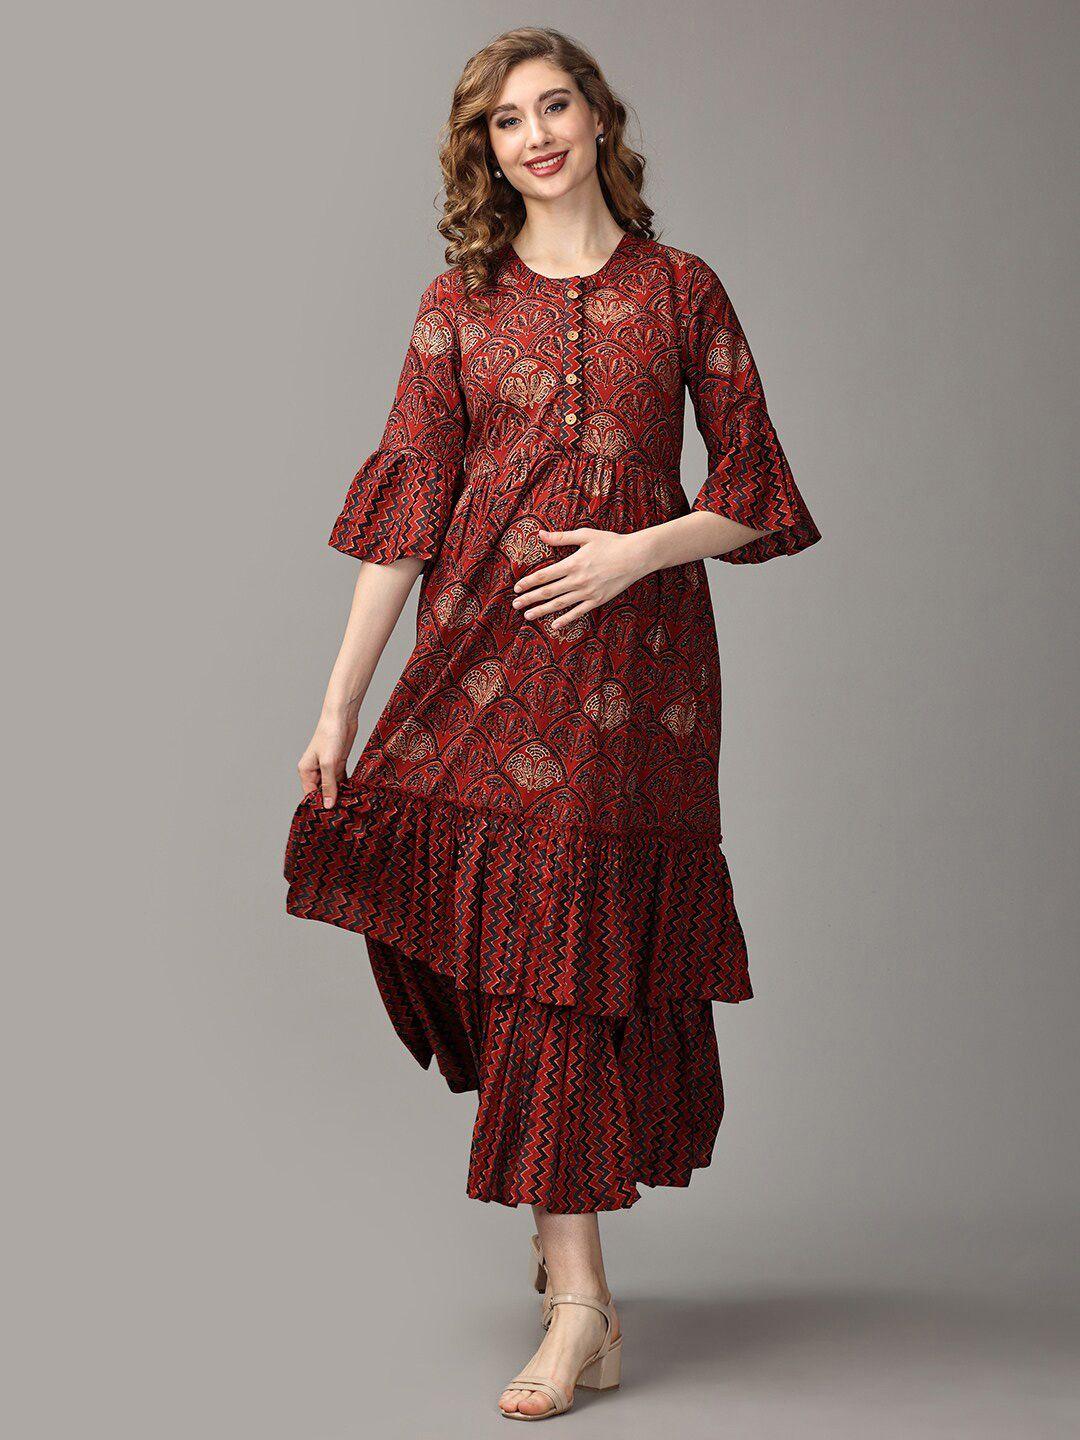 the mom store floral printed cotton bell sleeve a-line maternity dress